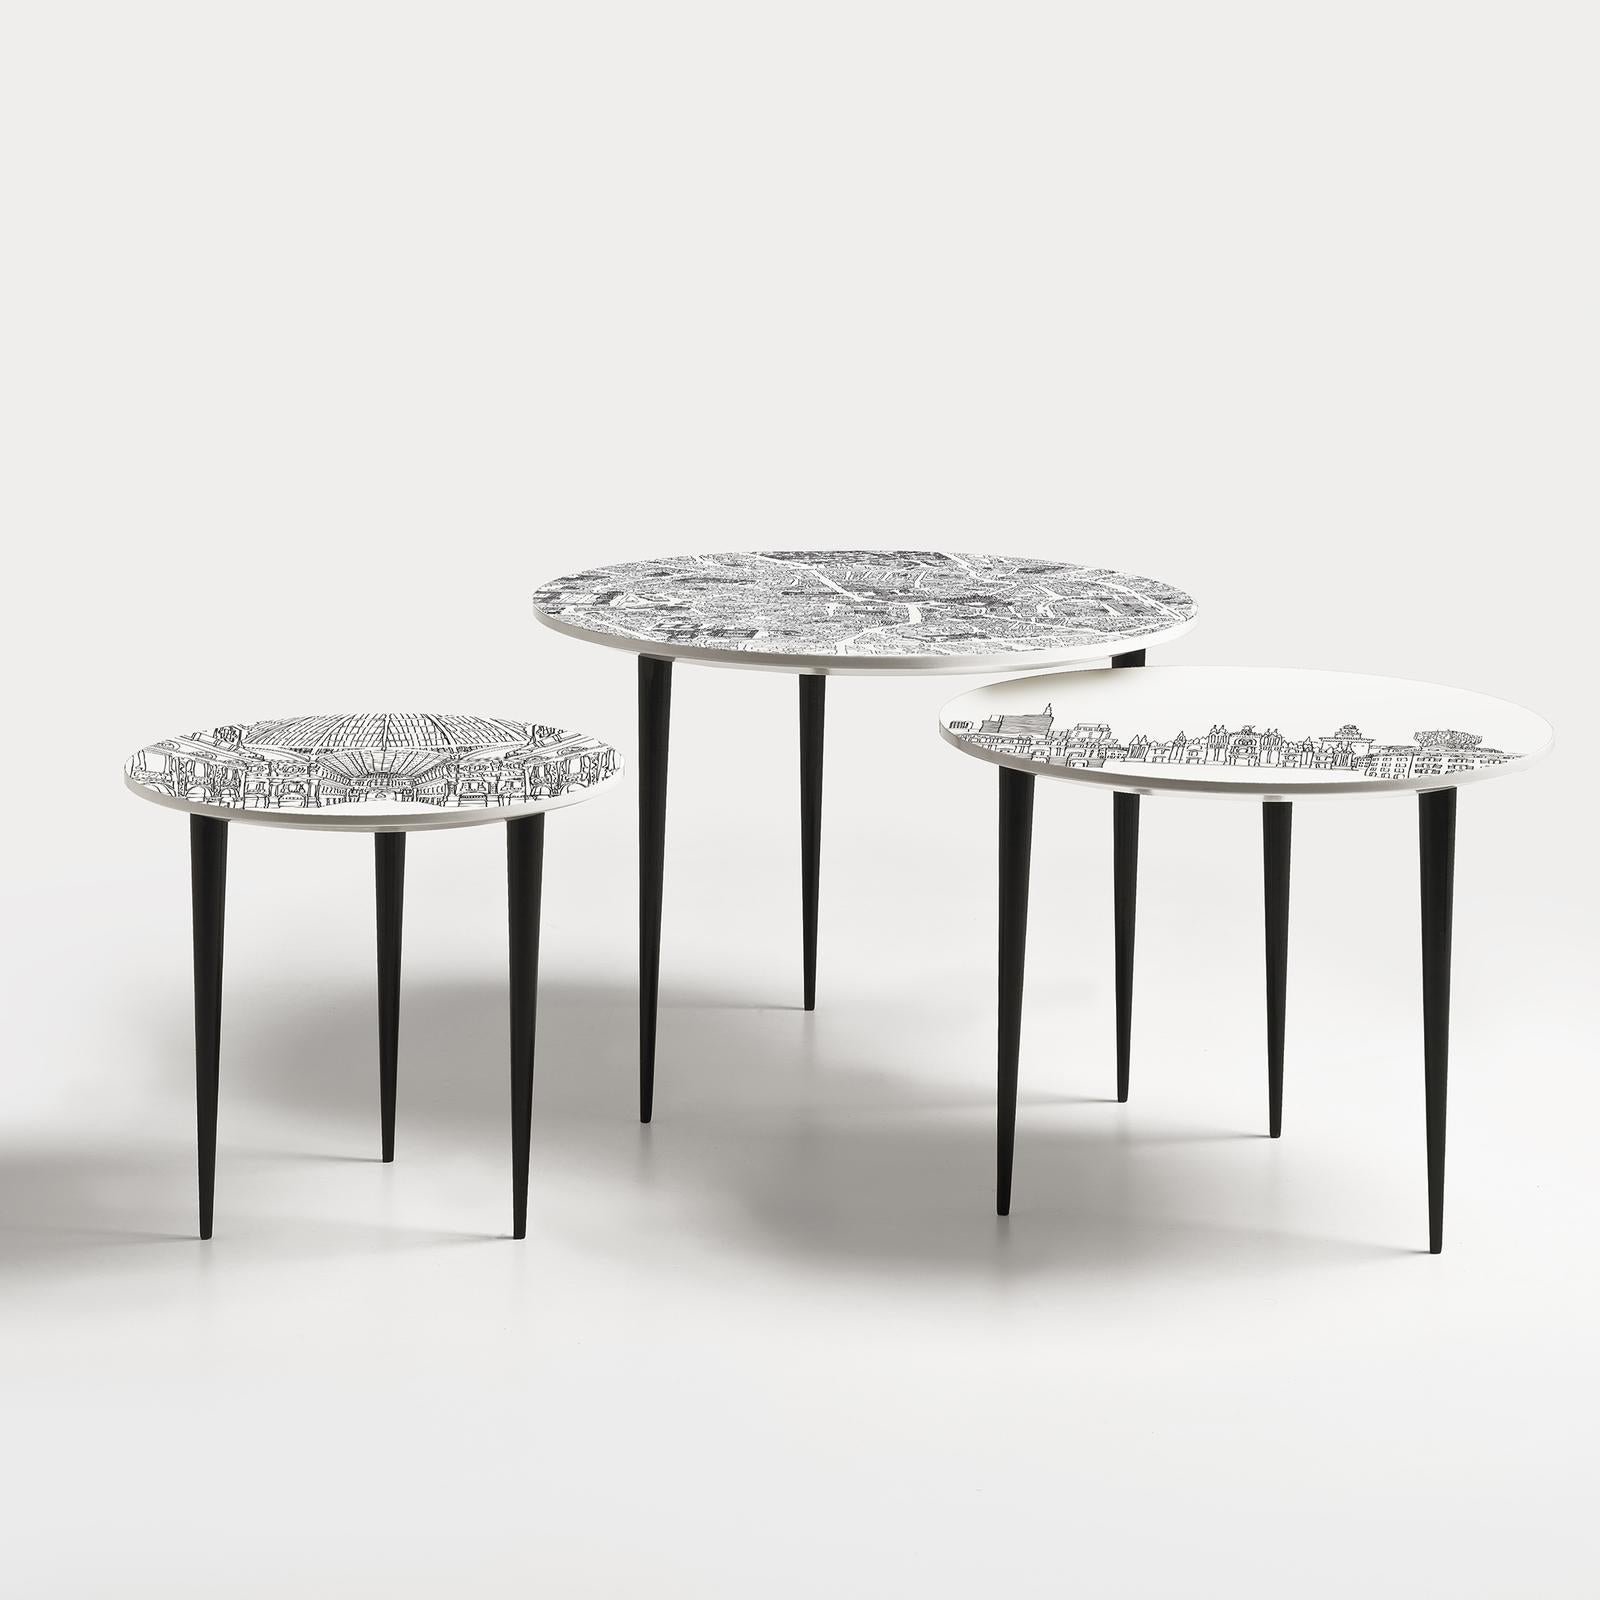 Designed by Anna Sutor for Extroverso, these exclusive nesting tables are made of wood with a glossy finish and feature black conical legs with white round tops accented with printed illustrations of the iconic urban landscapes of Milan from three